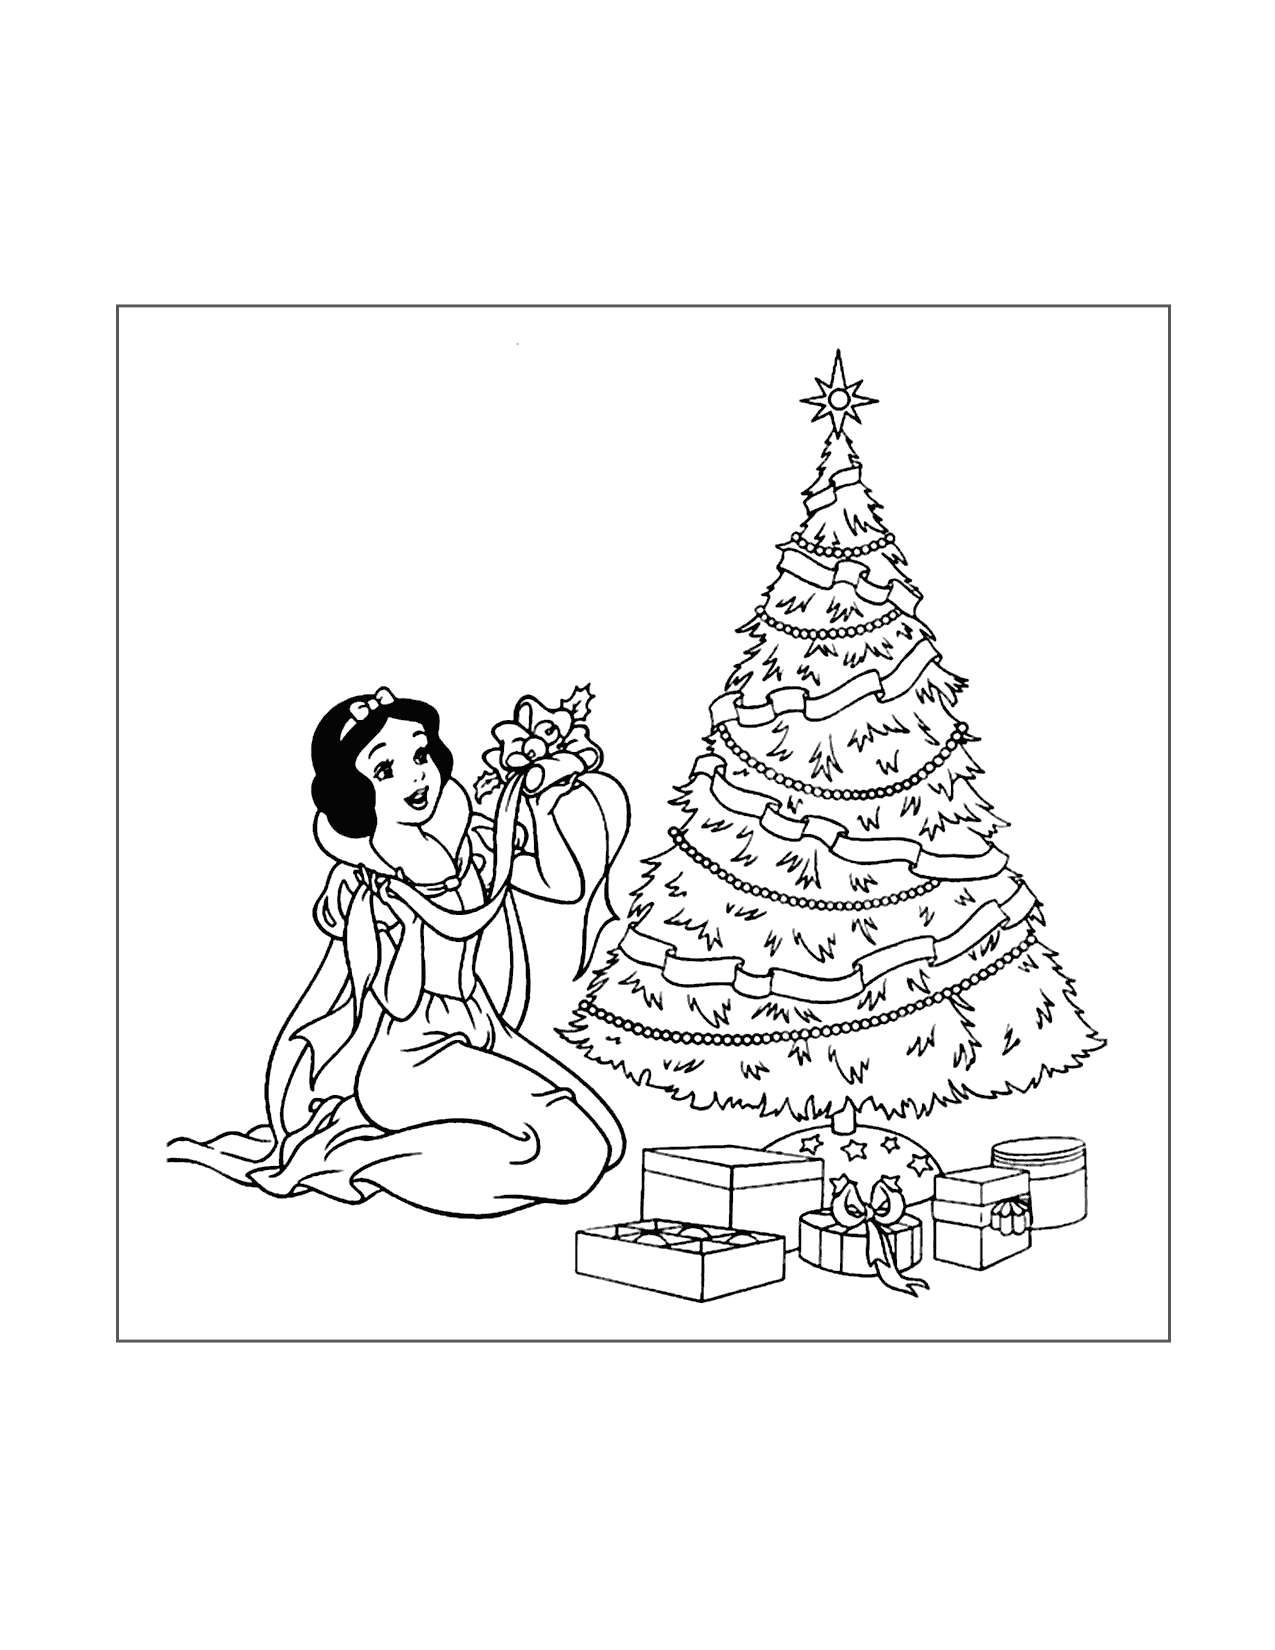 Now White Opens Christmas Presents Coloring Page